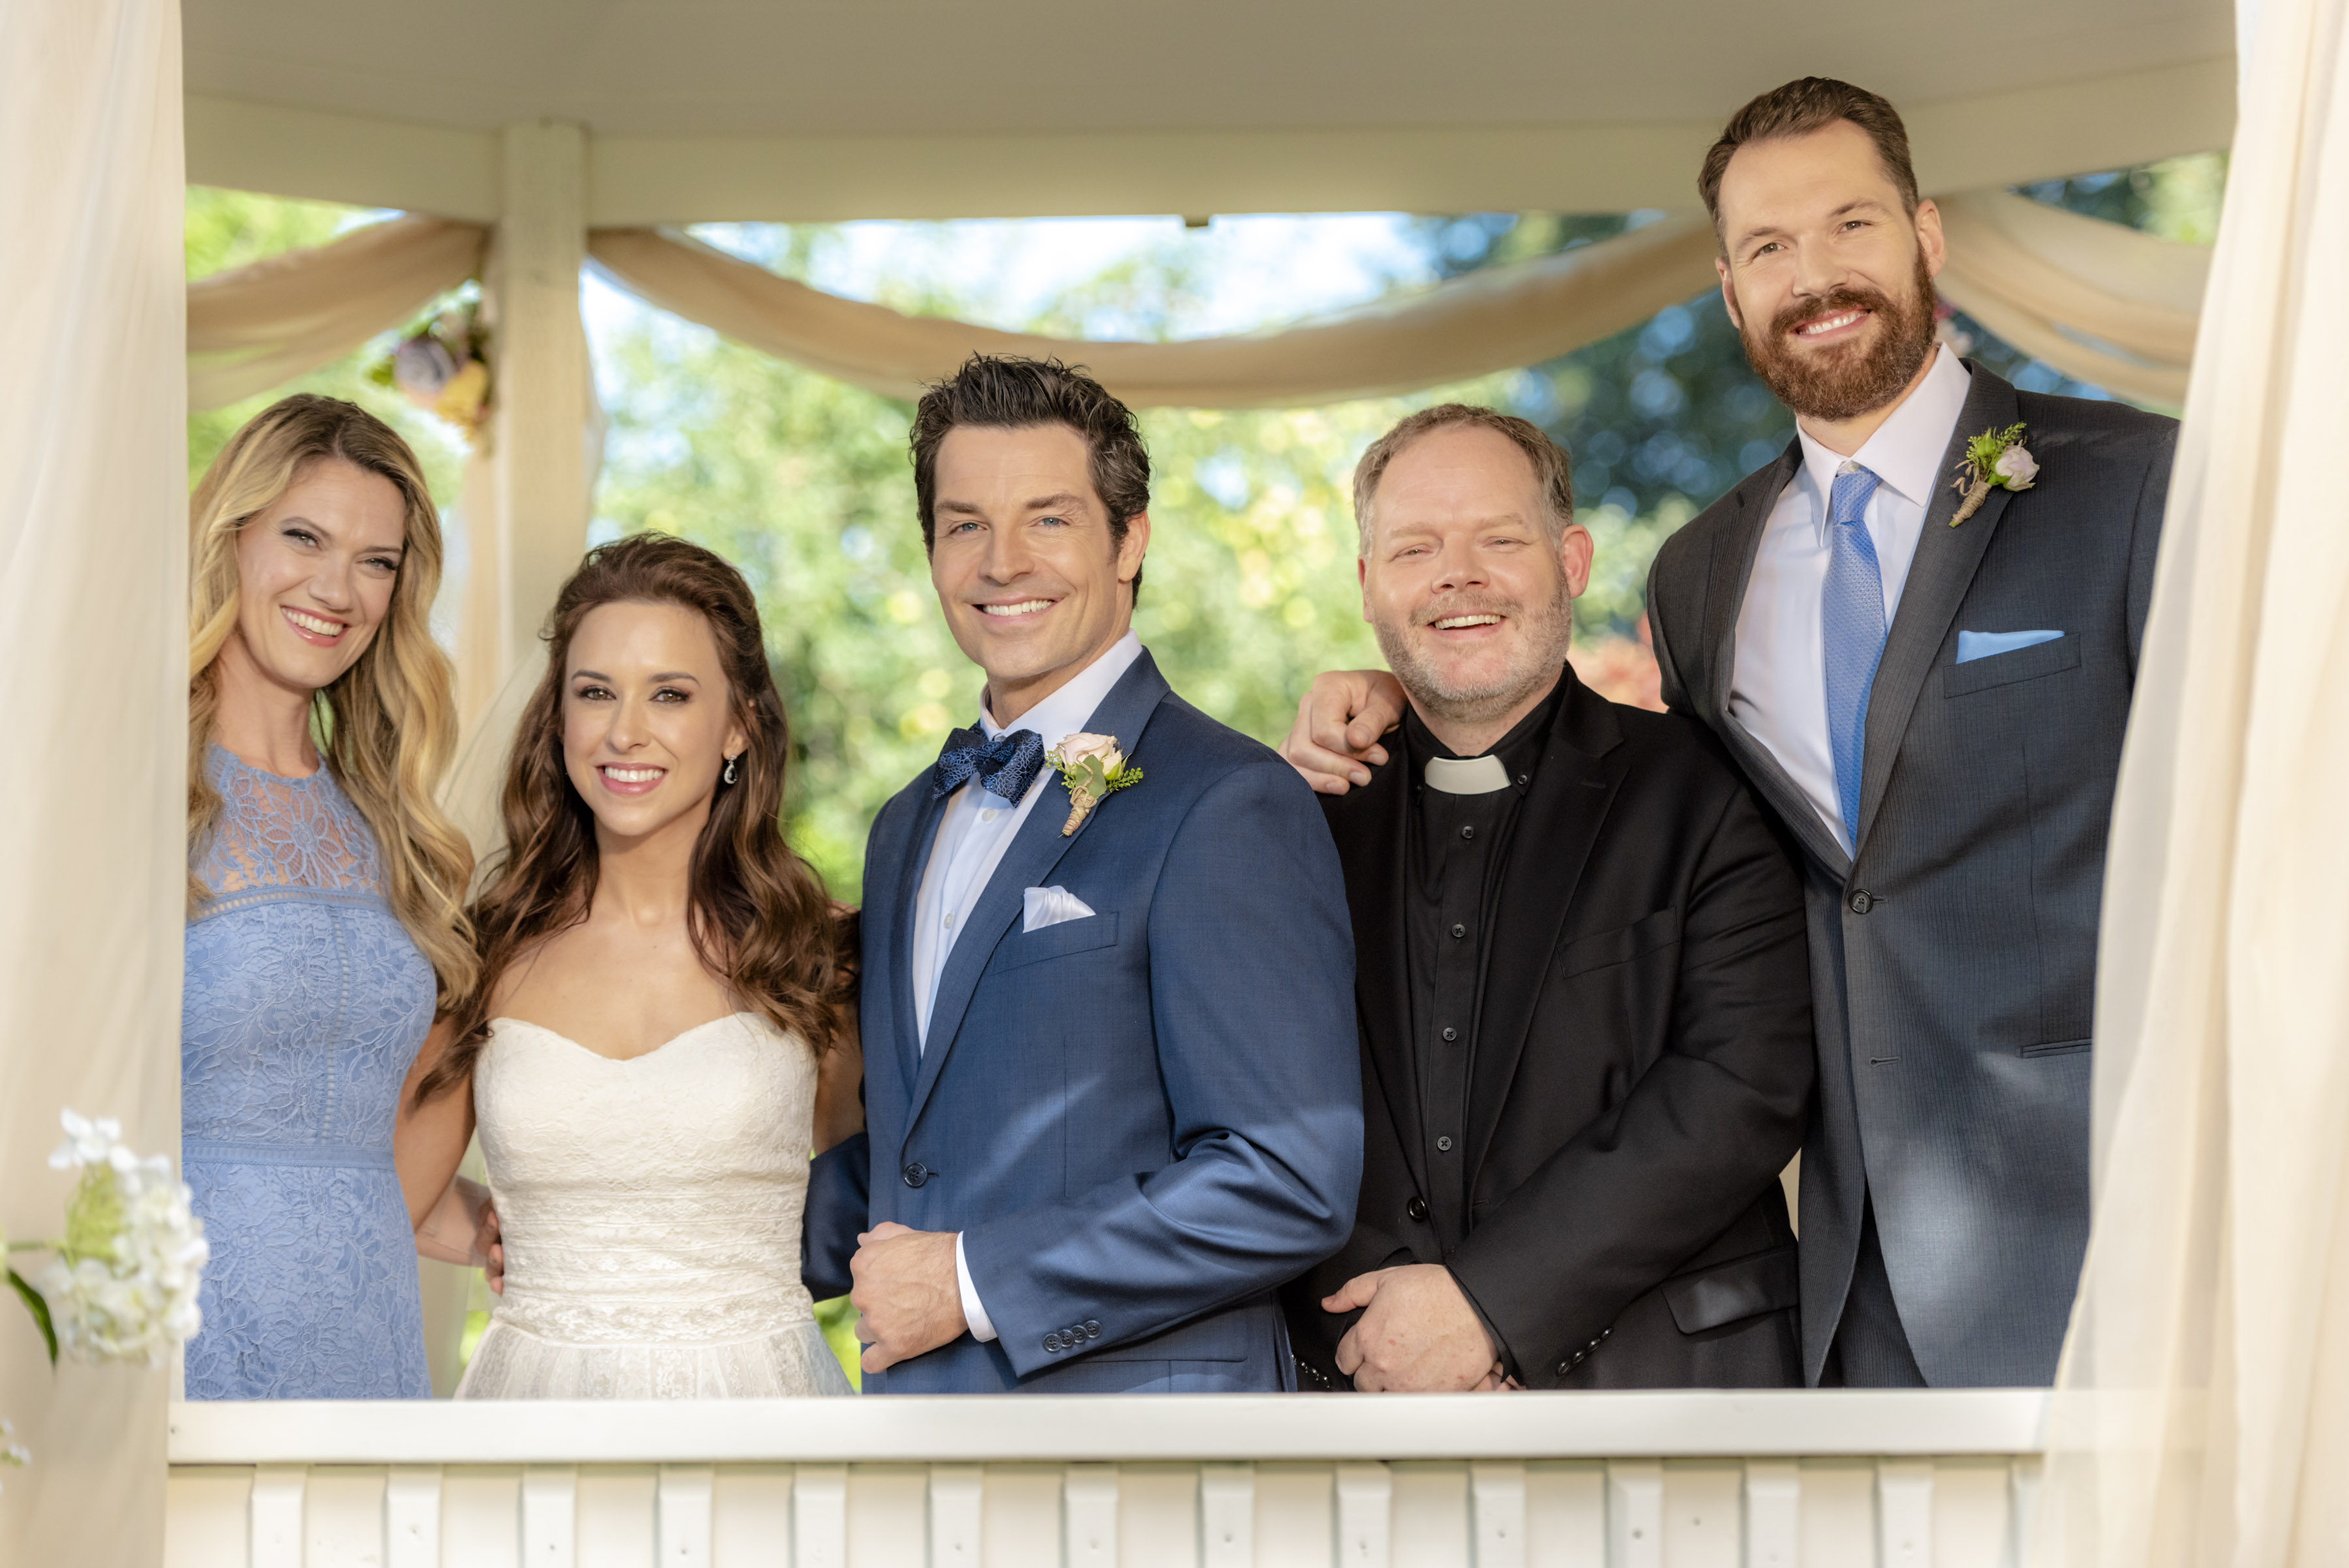 All Of My Heart The Wedding Cast Spoilers And Movie Photos 8192